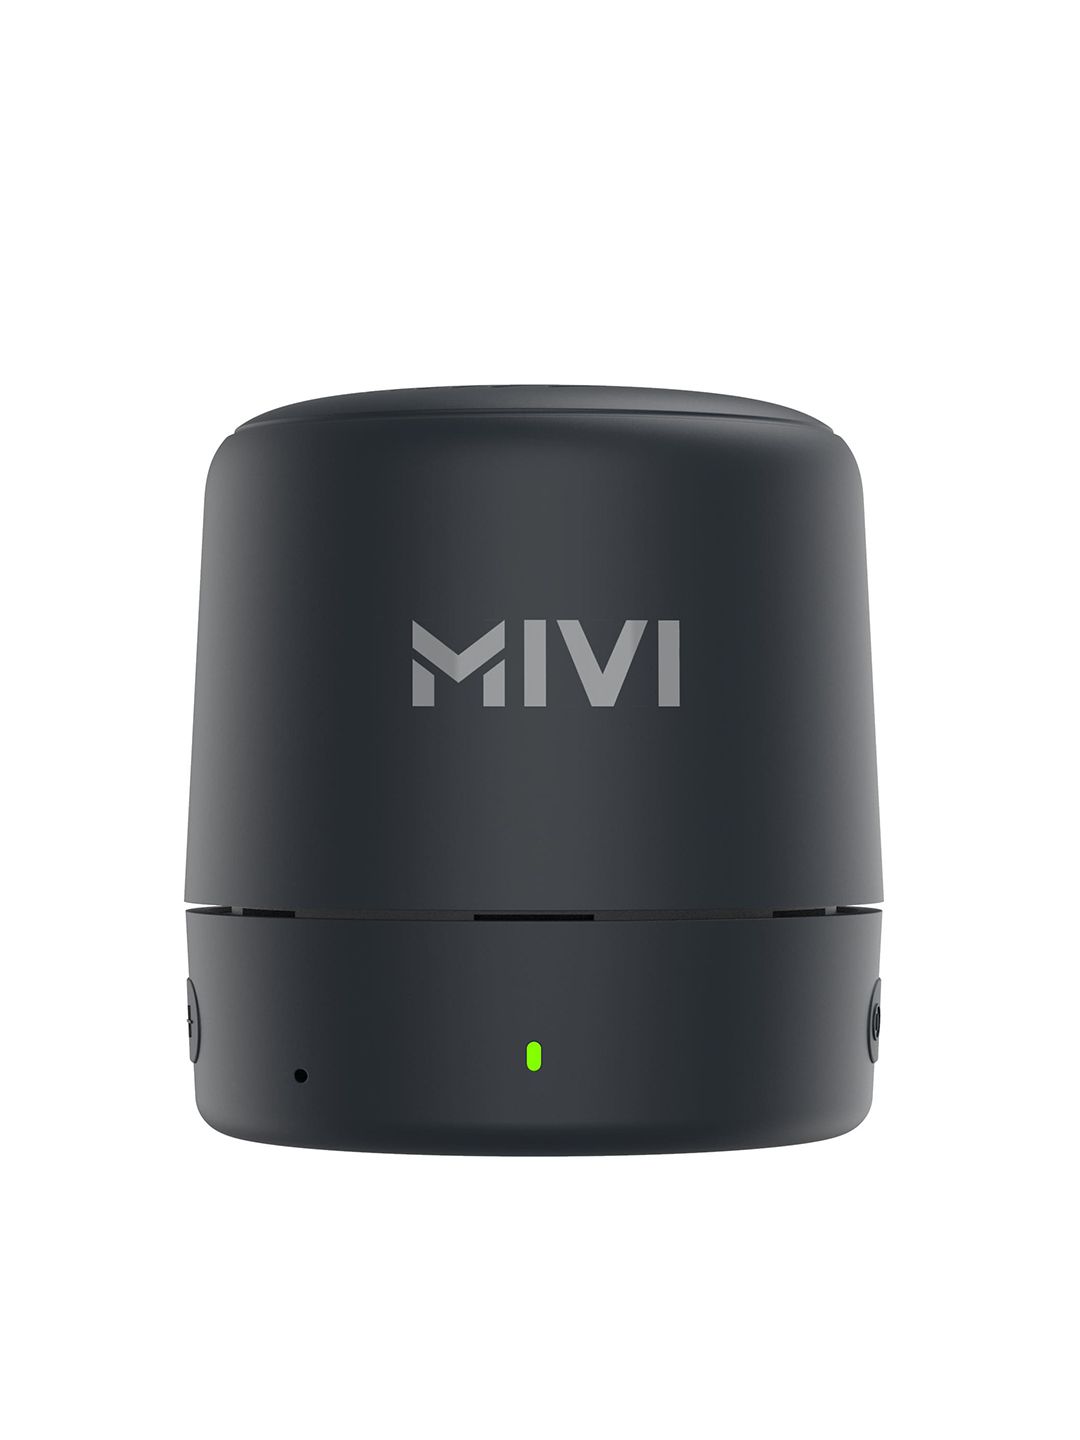 mivi Black Play Bluetooth Speaker with 12 Hours Playtime Price in India